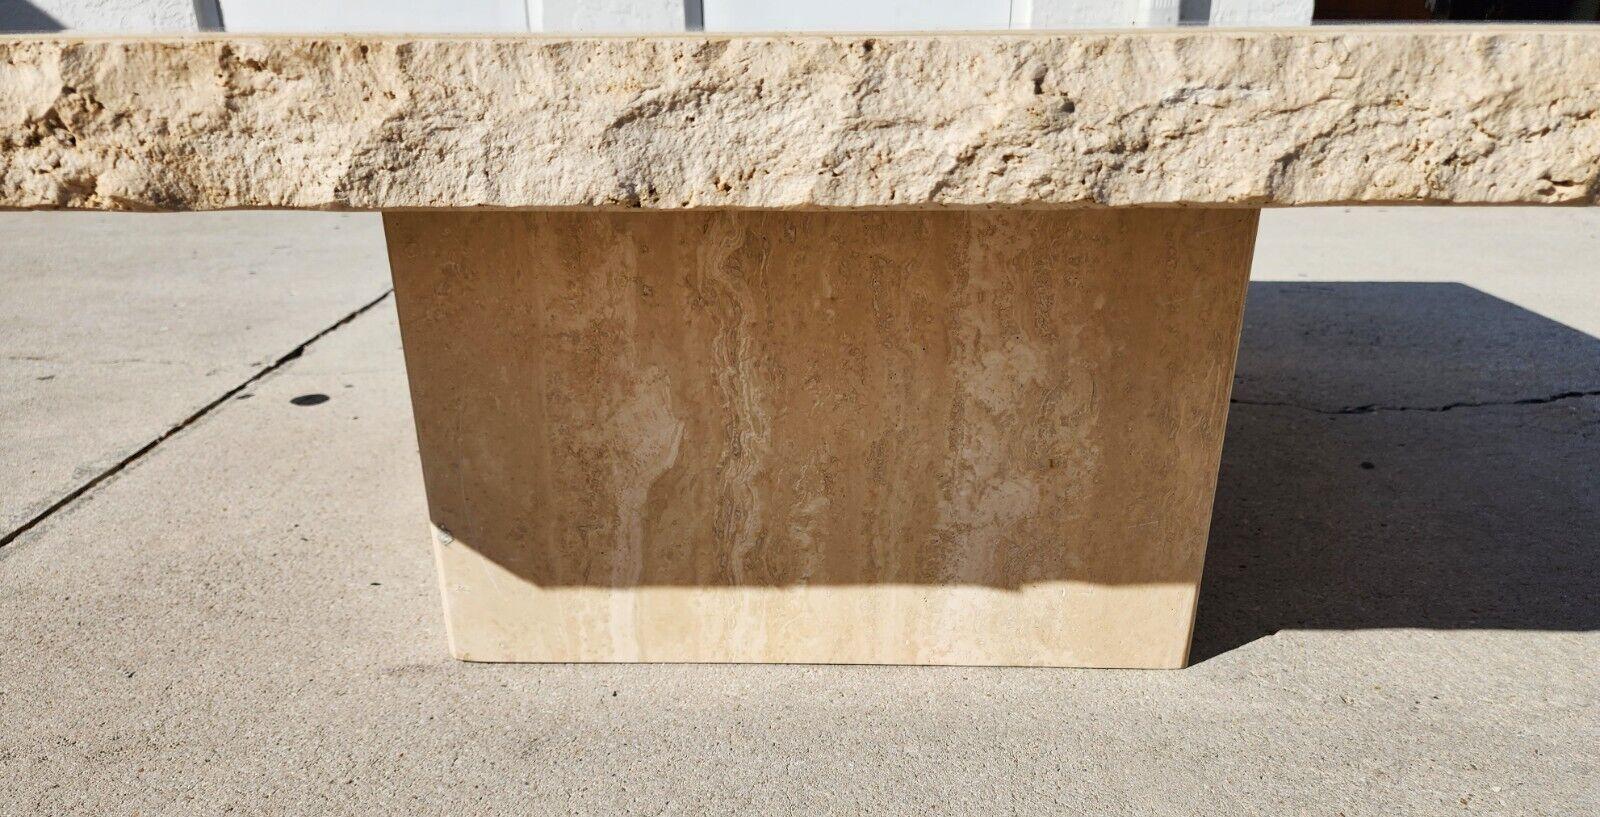 For FULL item description click on CONTINUE READING at the bottom of this page.

Offering one of our recent palm beach estate fine furniture acquisitions of a
1970s Italian live edge polished travertine coffee cocktail table by STONE